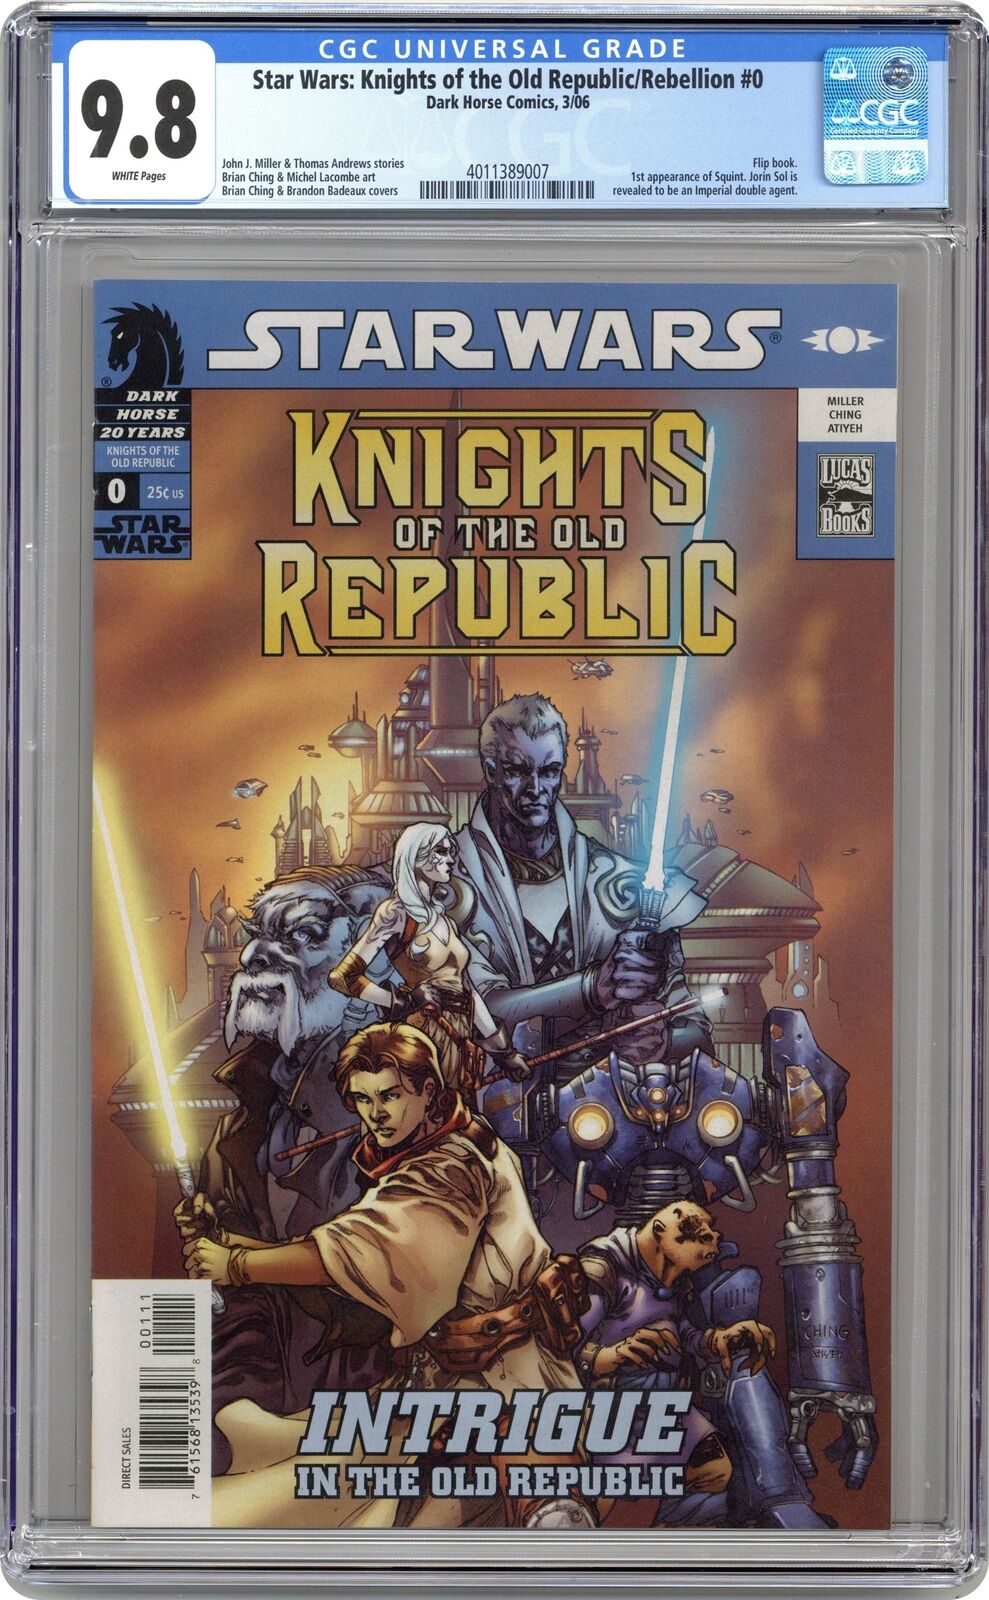 Star Wars Knights of the Old Republic/Rebellion #0 CGC 9.8 2006 4011389007